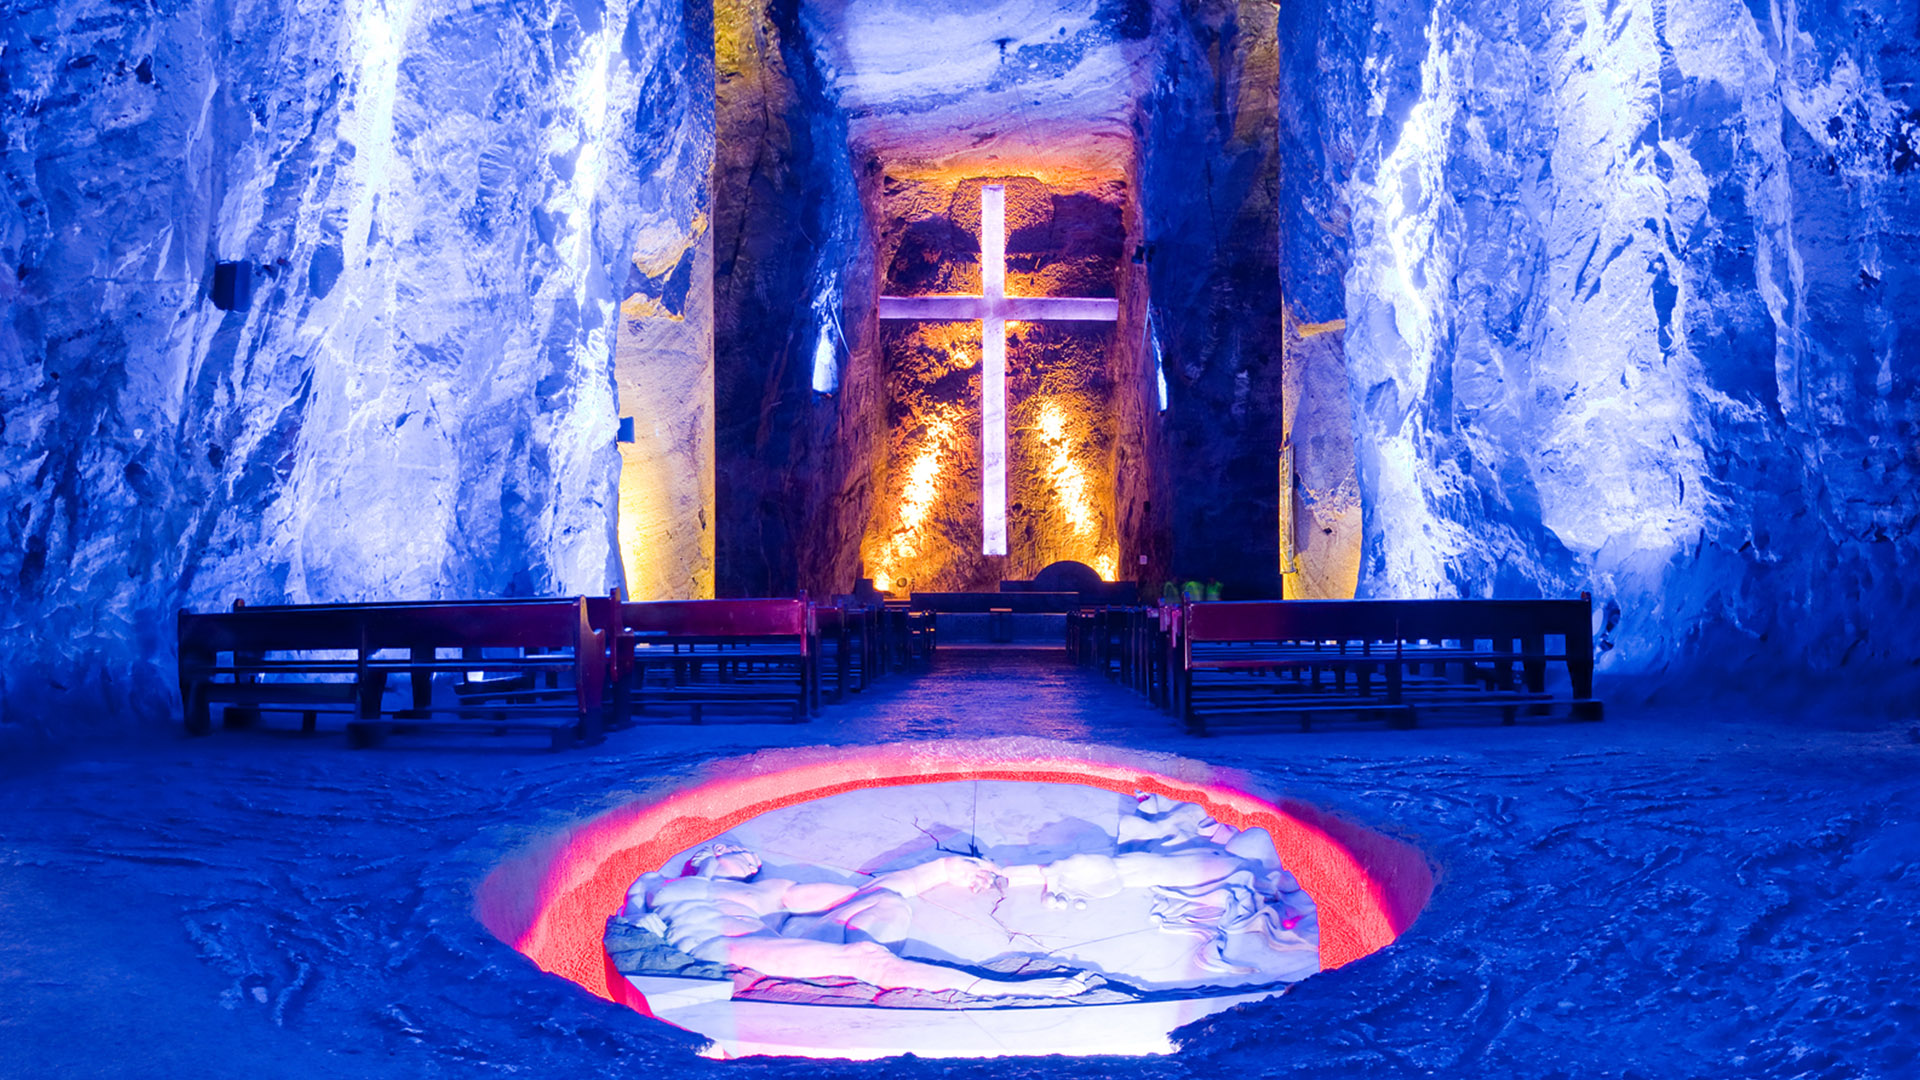 Cathedral built out of cave